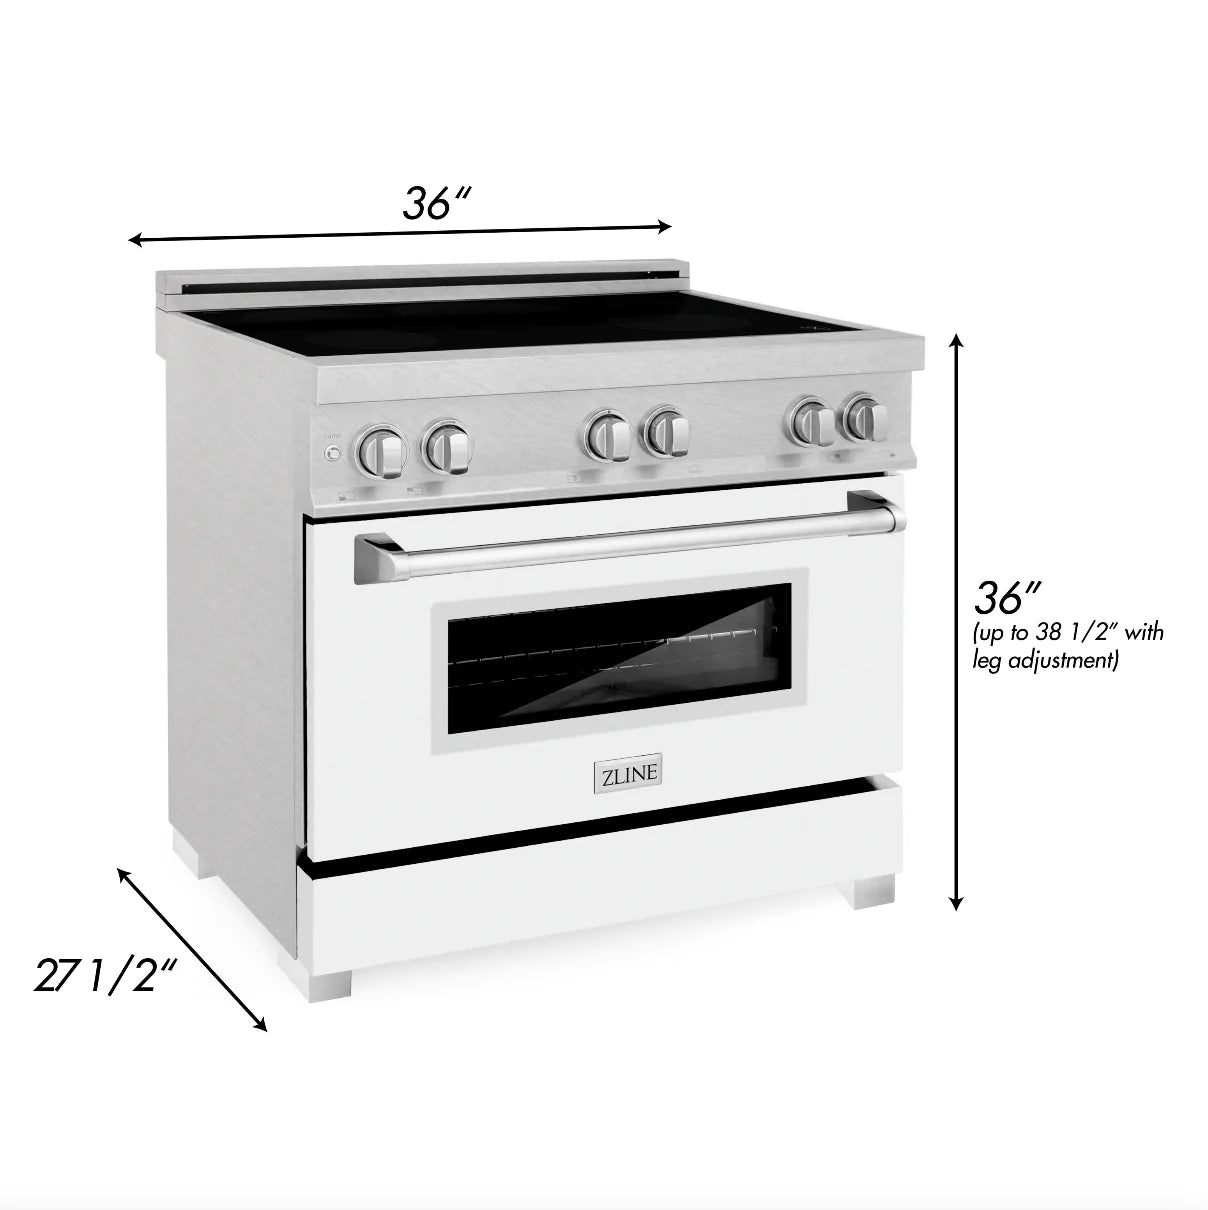 ZLINE 36 in. Induction Range in Fingerprint Resistant Stainless Steel with a 4 Element Stove, Electric Oven, and White Matte Door (RAINDS-WM-36)